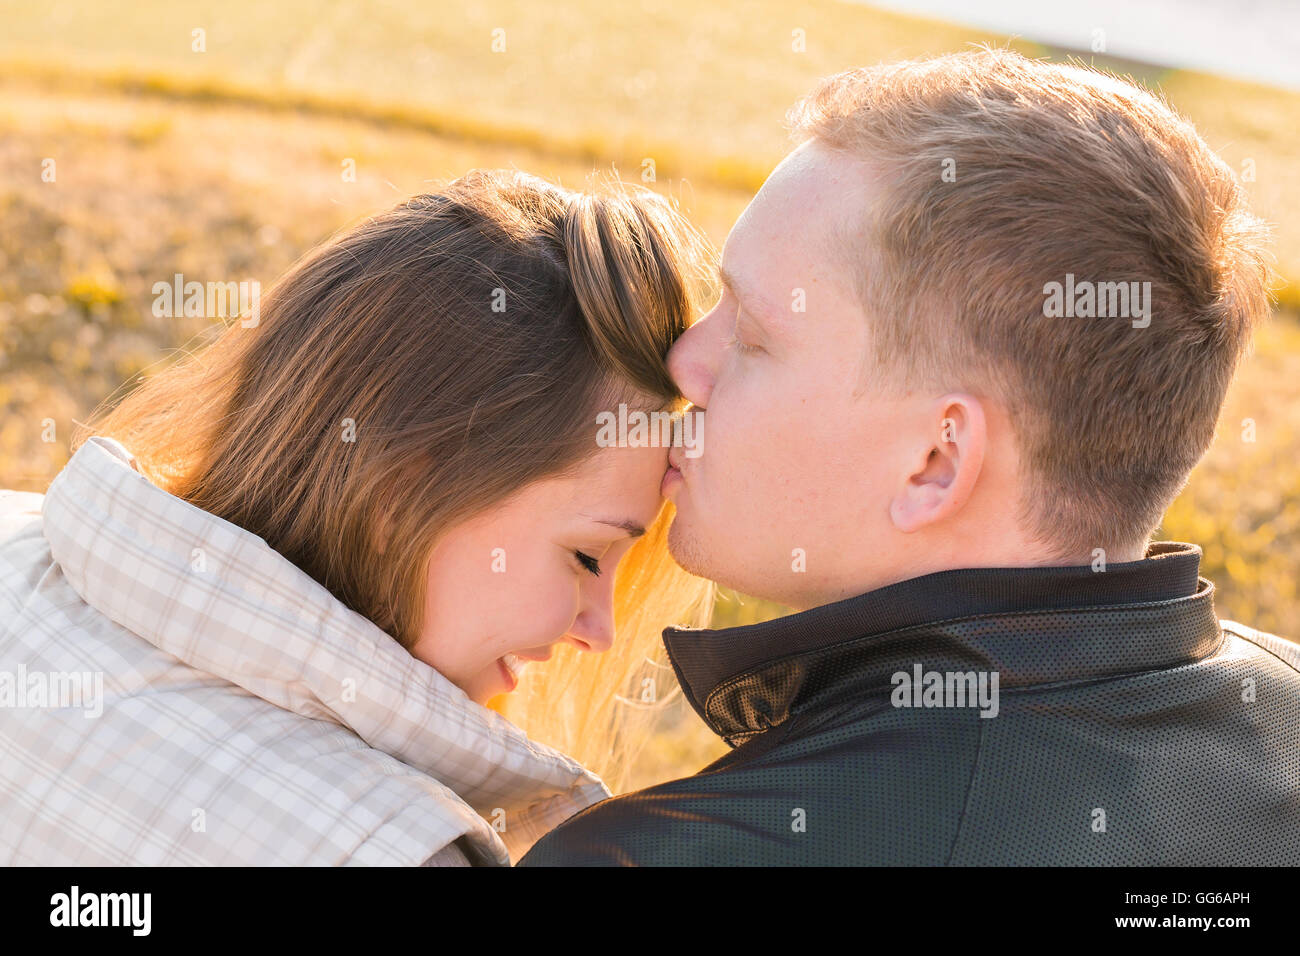 Sweet kiss. Handsome young man kissing his girlfriend on forehead in autumn  park Stock Photo - Alamy